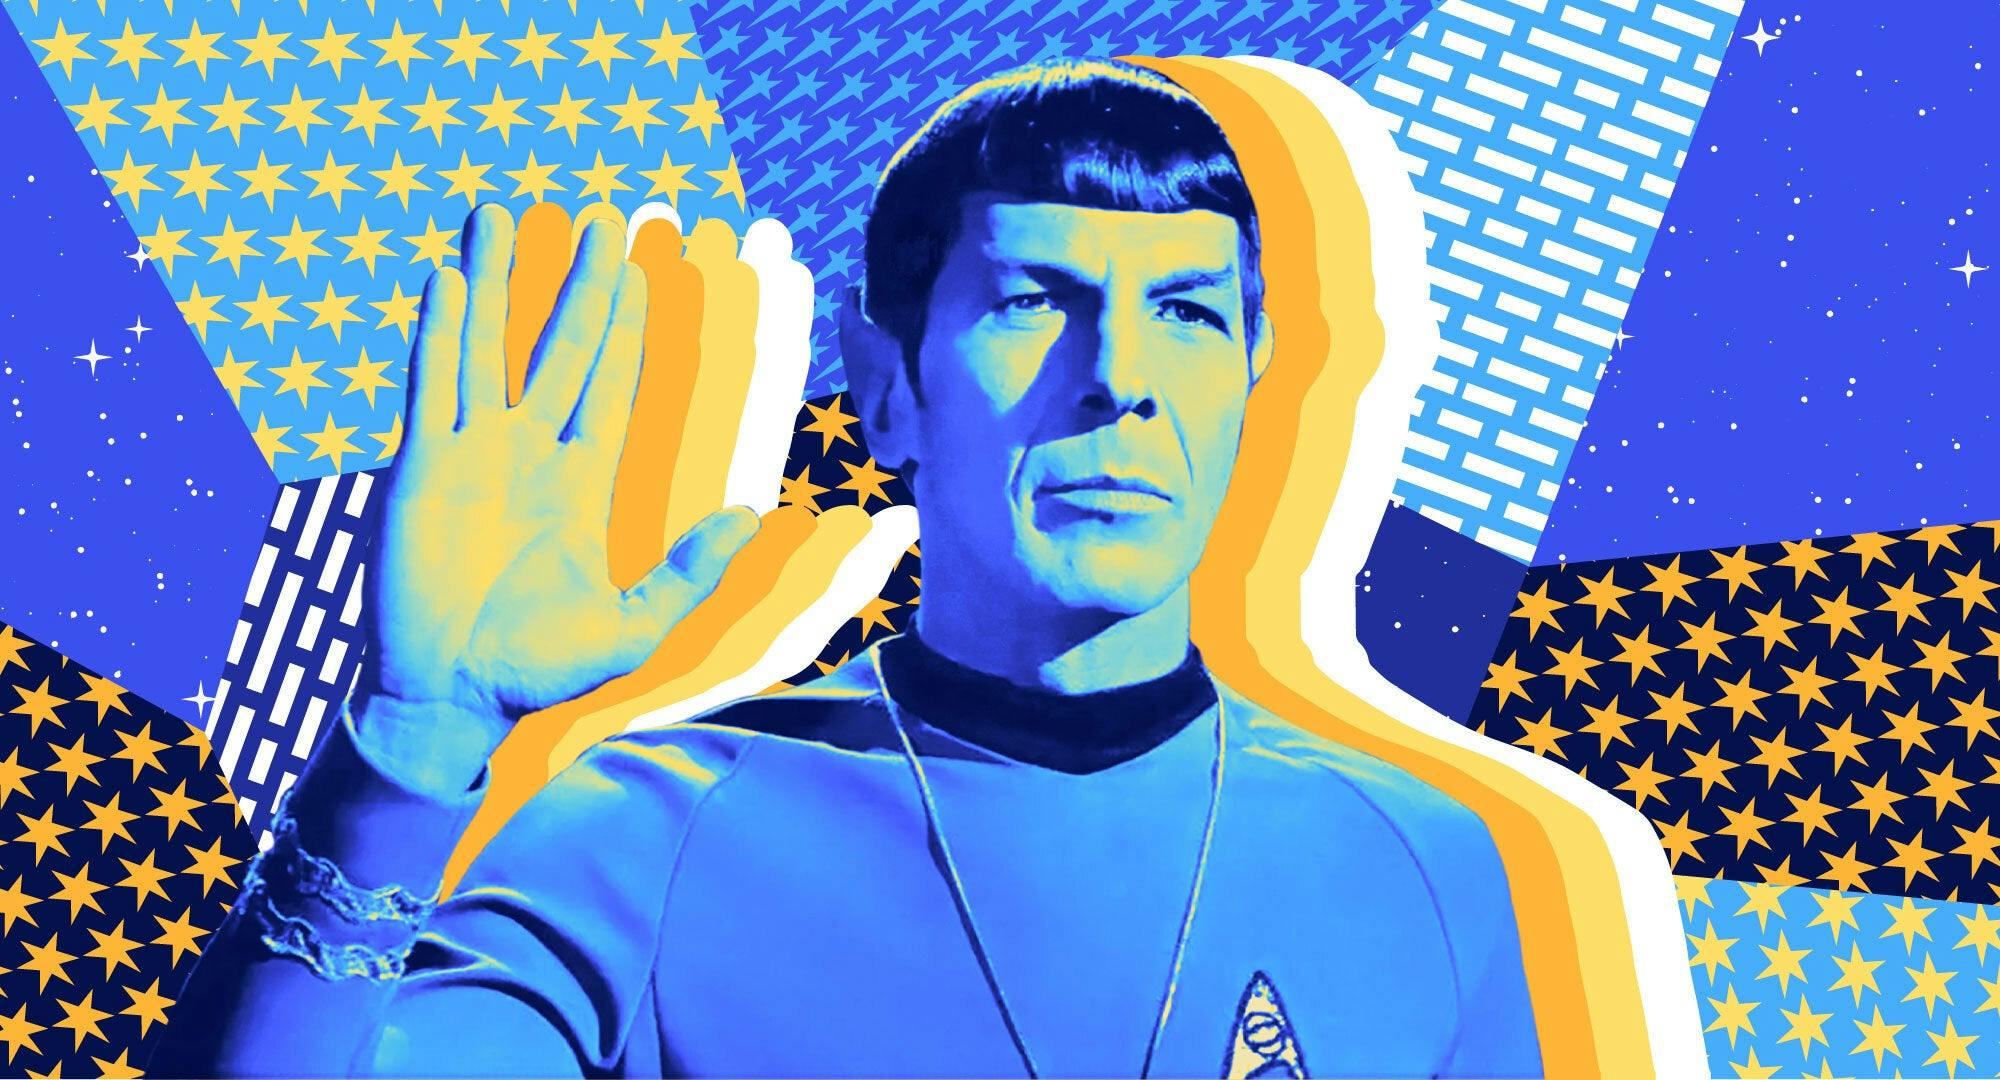 Illustrated banner featuring Spock doing the Live Long and Prosper Vulcan salute